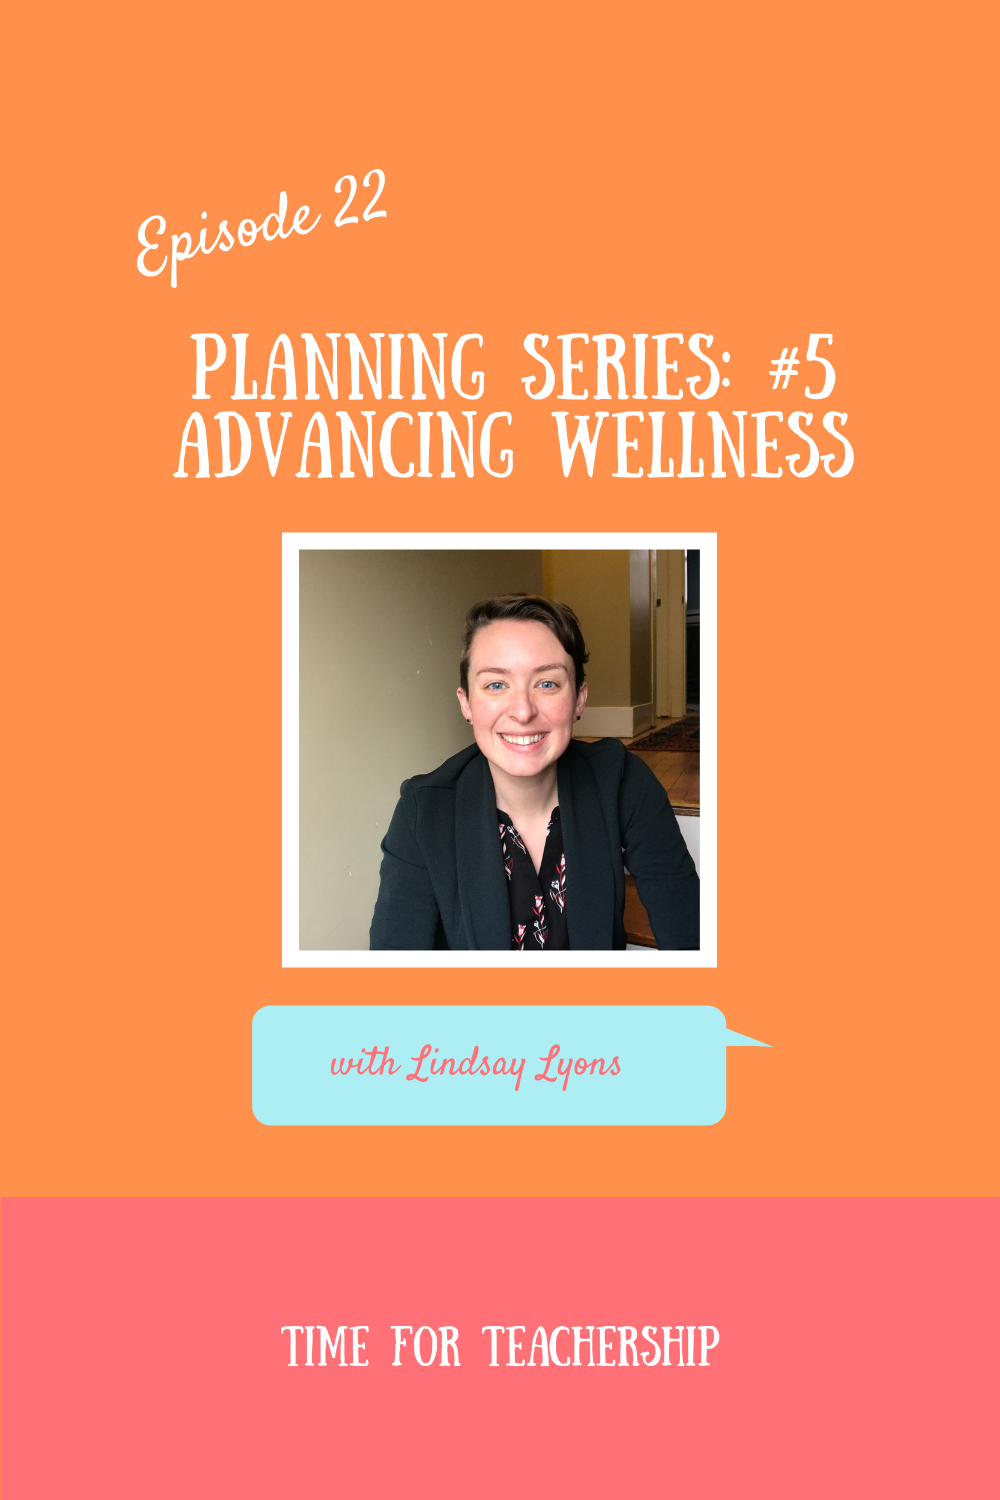 22. Planning Series Part 5-Advancing Wellness. In this post, I share why wellness belongs in your teacher life. There are multiple types of wellness and it only takes a little effort to go a long way. Check out the Time for Teachership blog post for a dose of wellness. For more tips and #teacherfreebies, sign up for weekly emails at bit.ly/lindsayletter